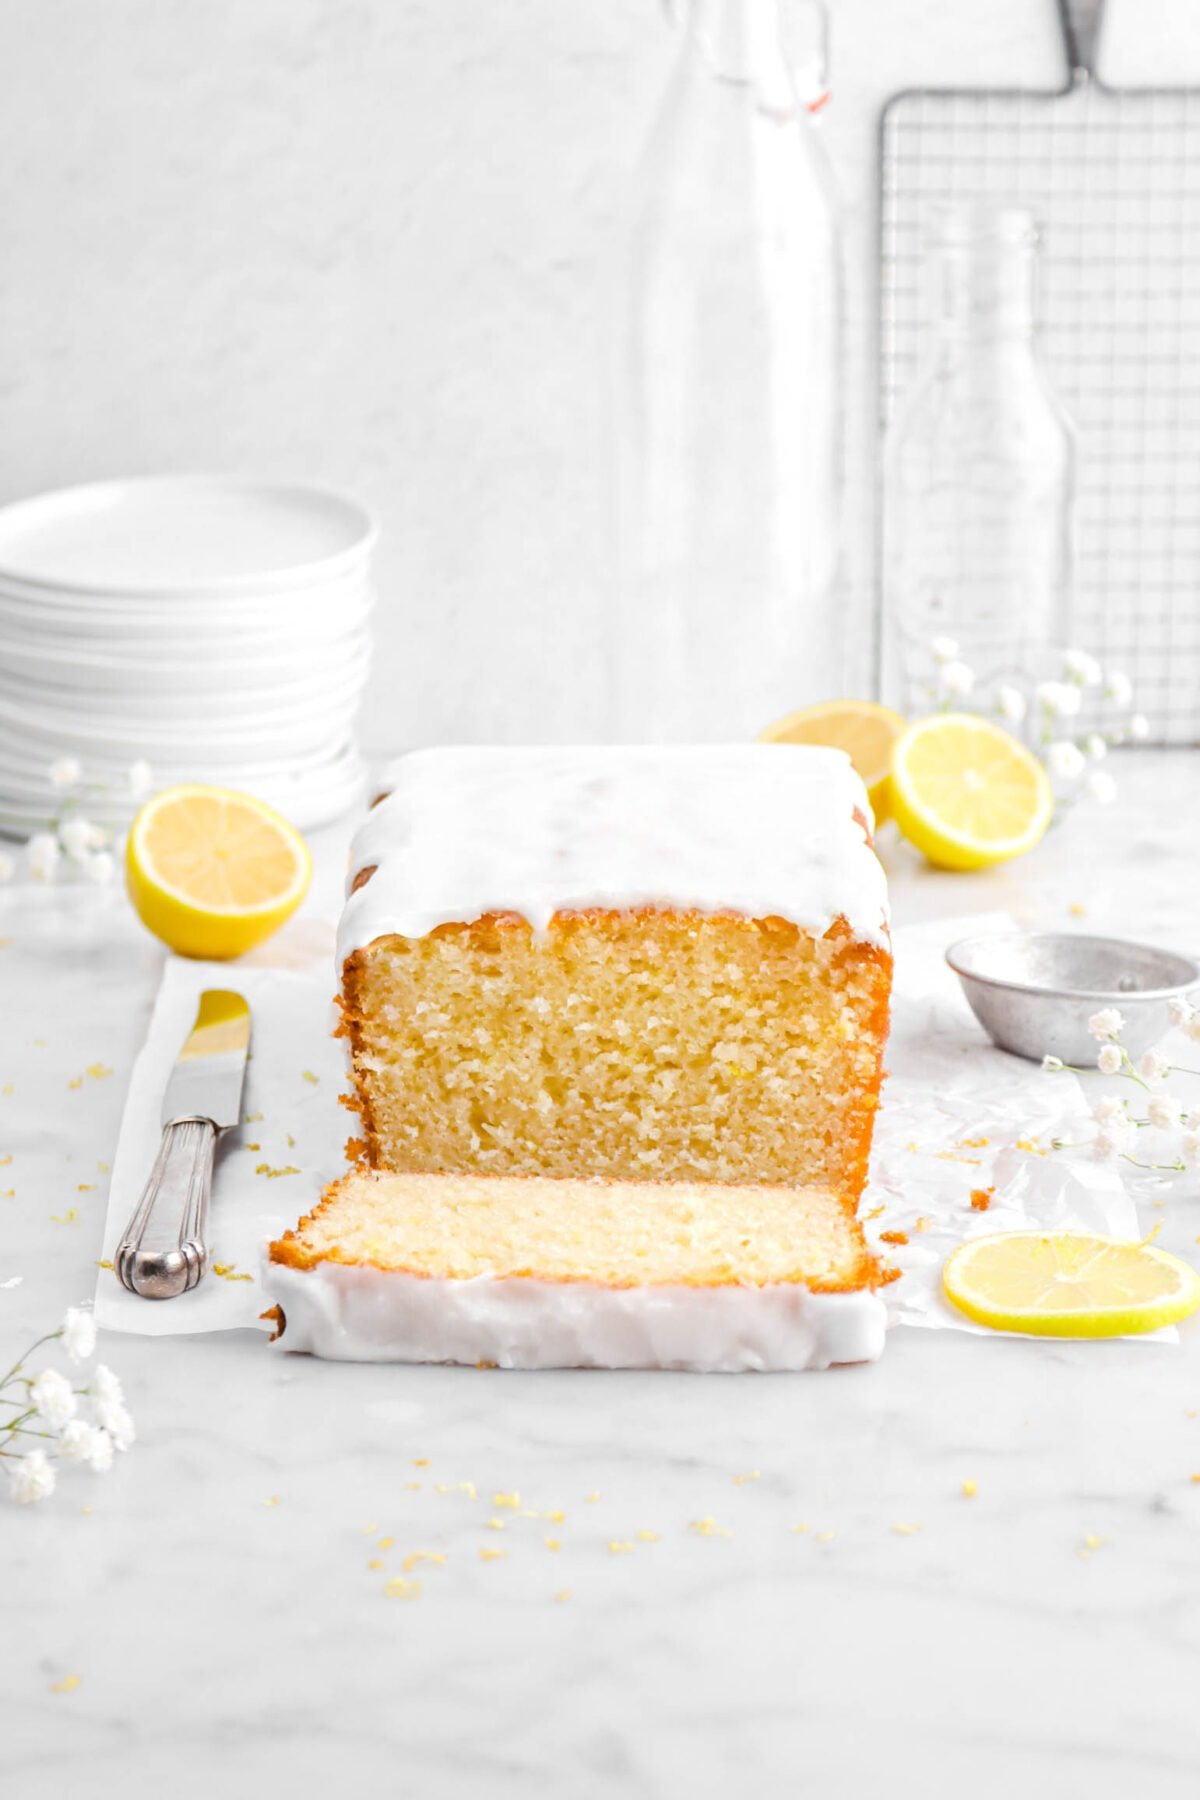 iced loaf cake on parchment paper with slice laying in front with a knife beside, white flowers around, and lemons behind on marble surface with stack of plates and empty glasses behind.